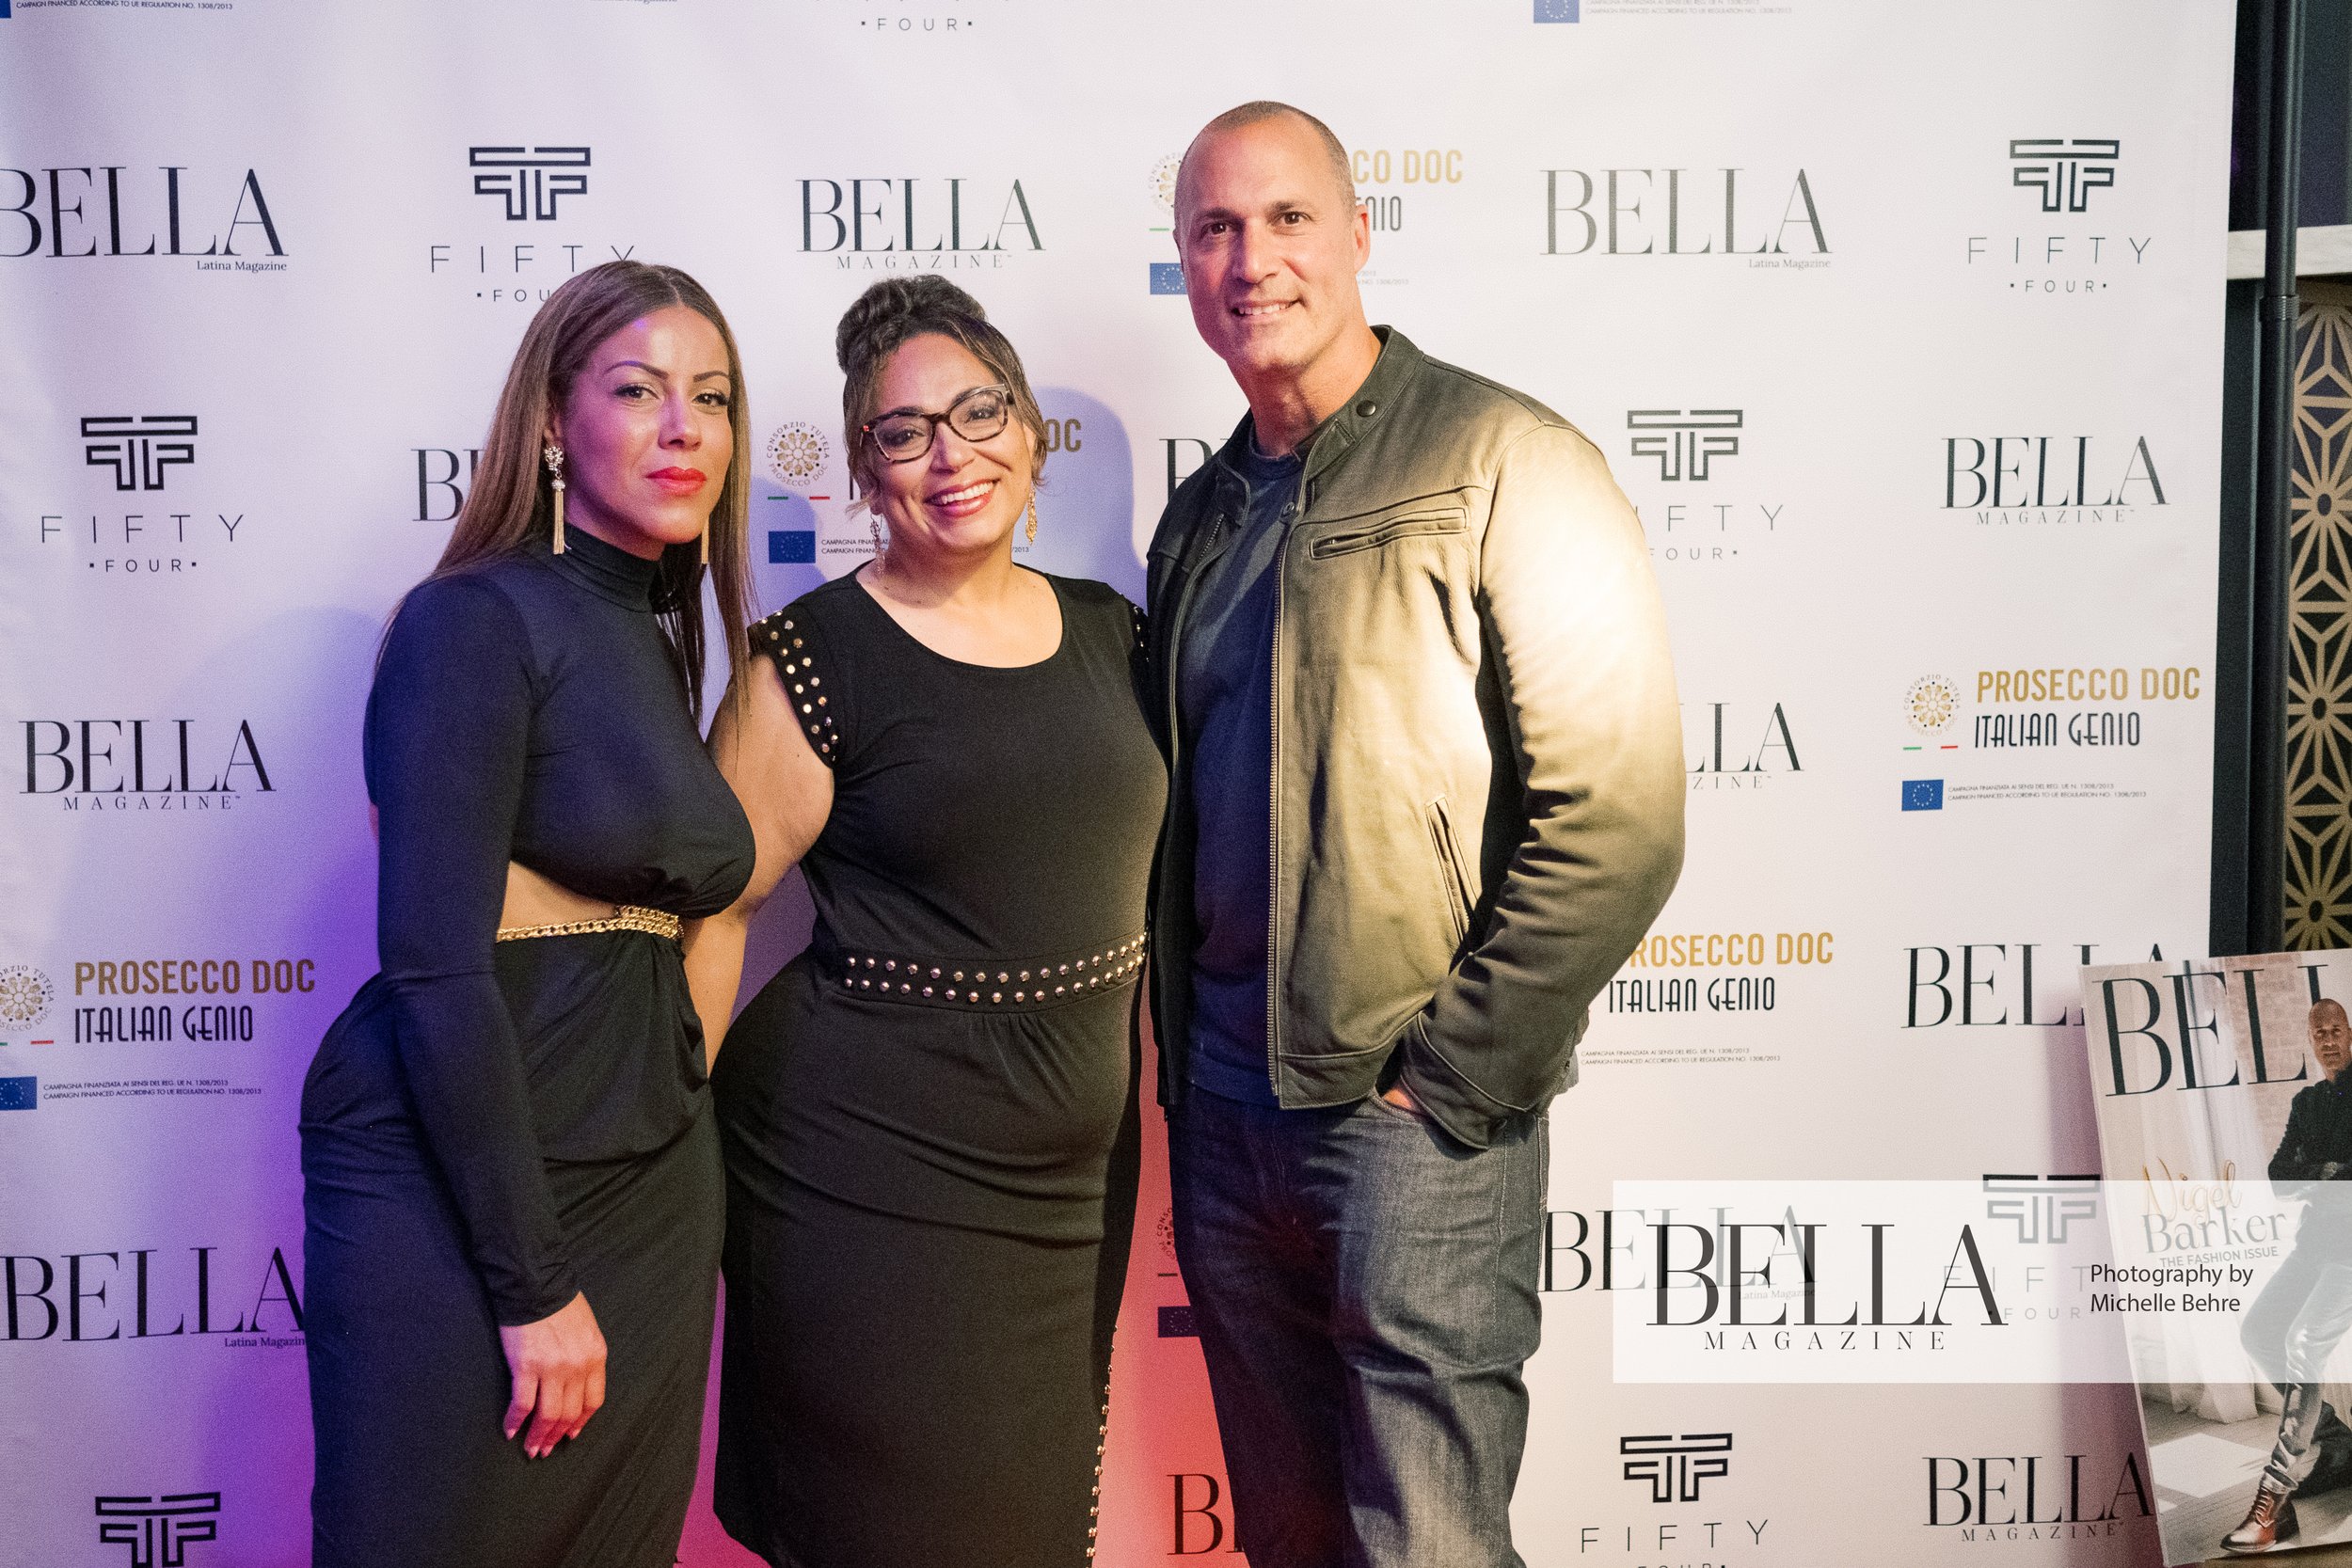 BELLA-Magazine-September-Issue-Cover-Event-Fifty-Four-237.jpg